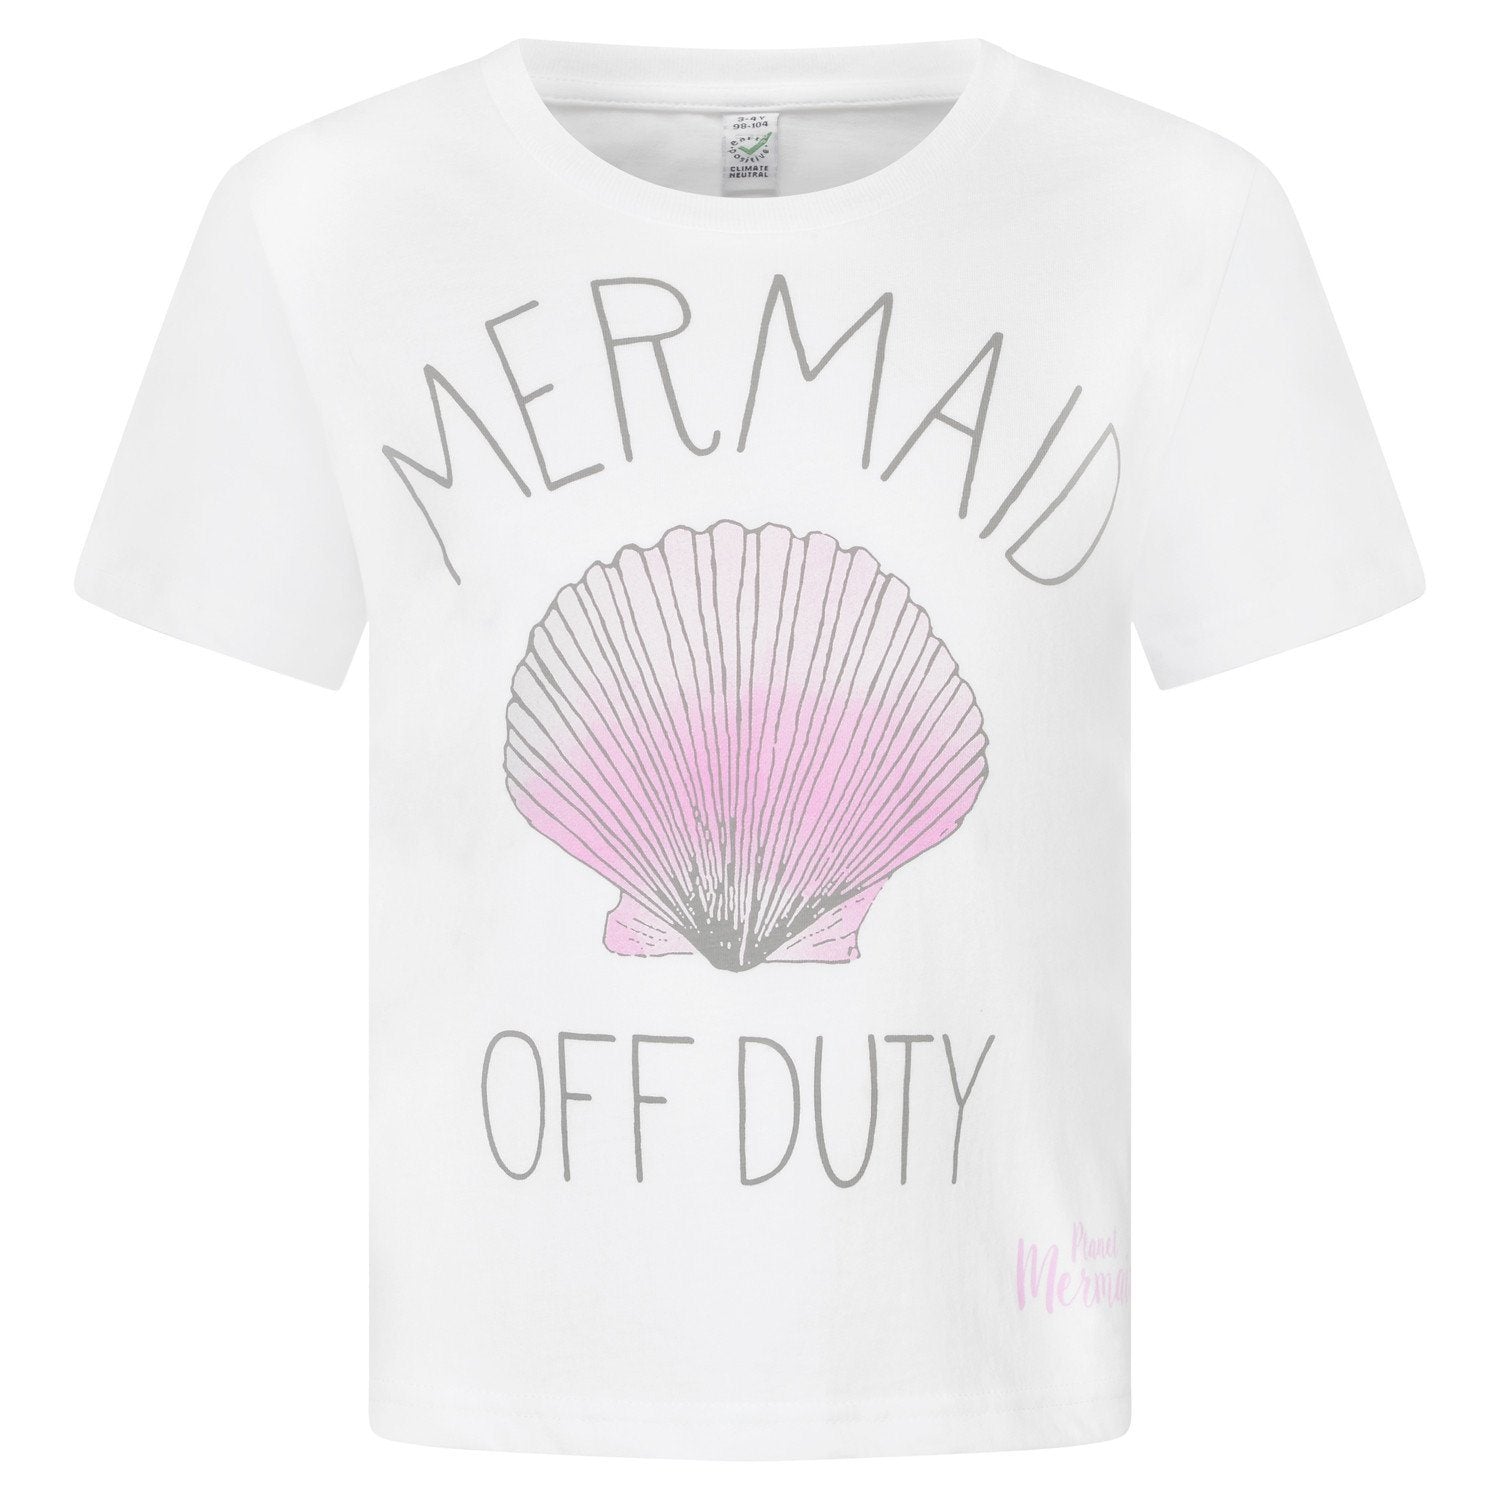 "Mermaid Off Duty" White Girls Cotton T-shirt With Print Front